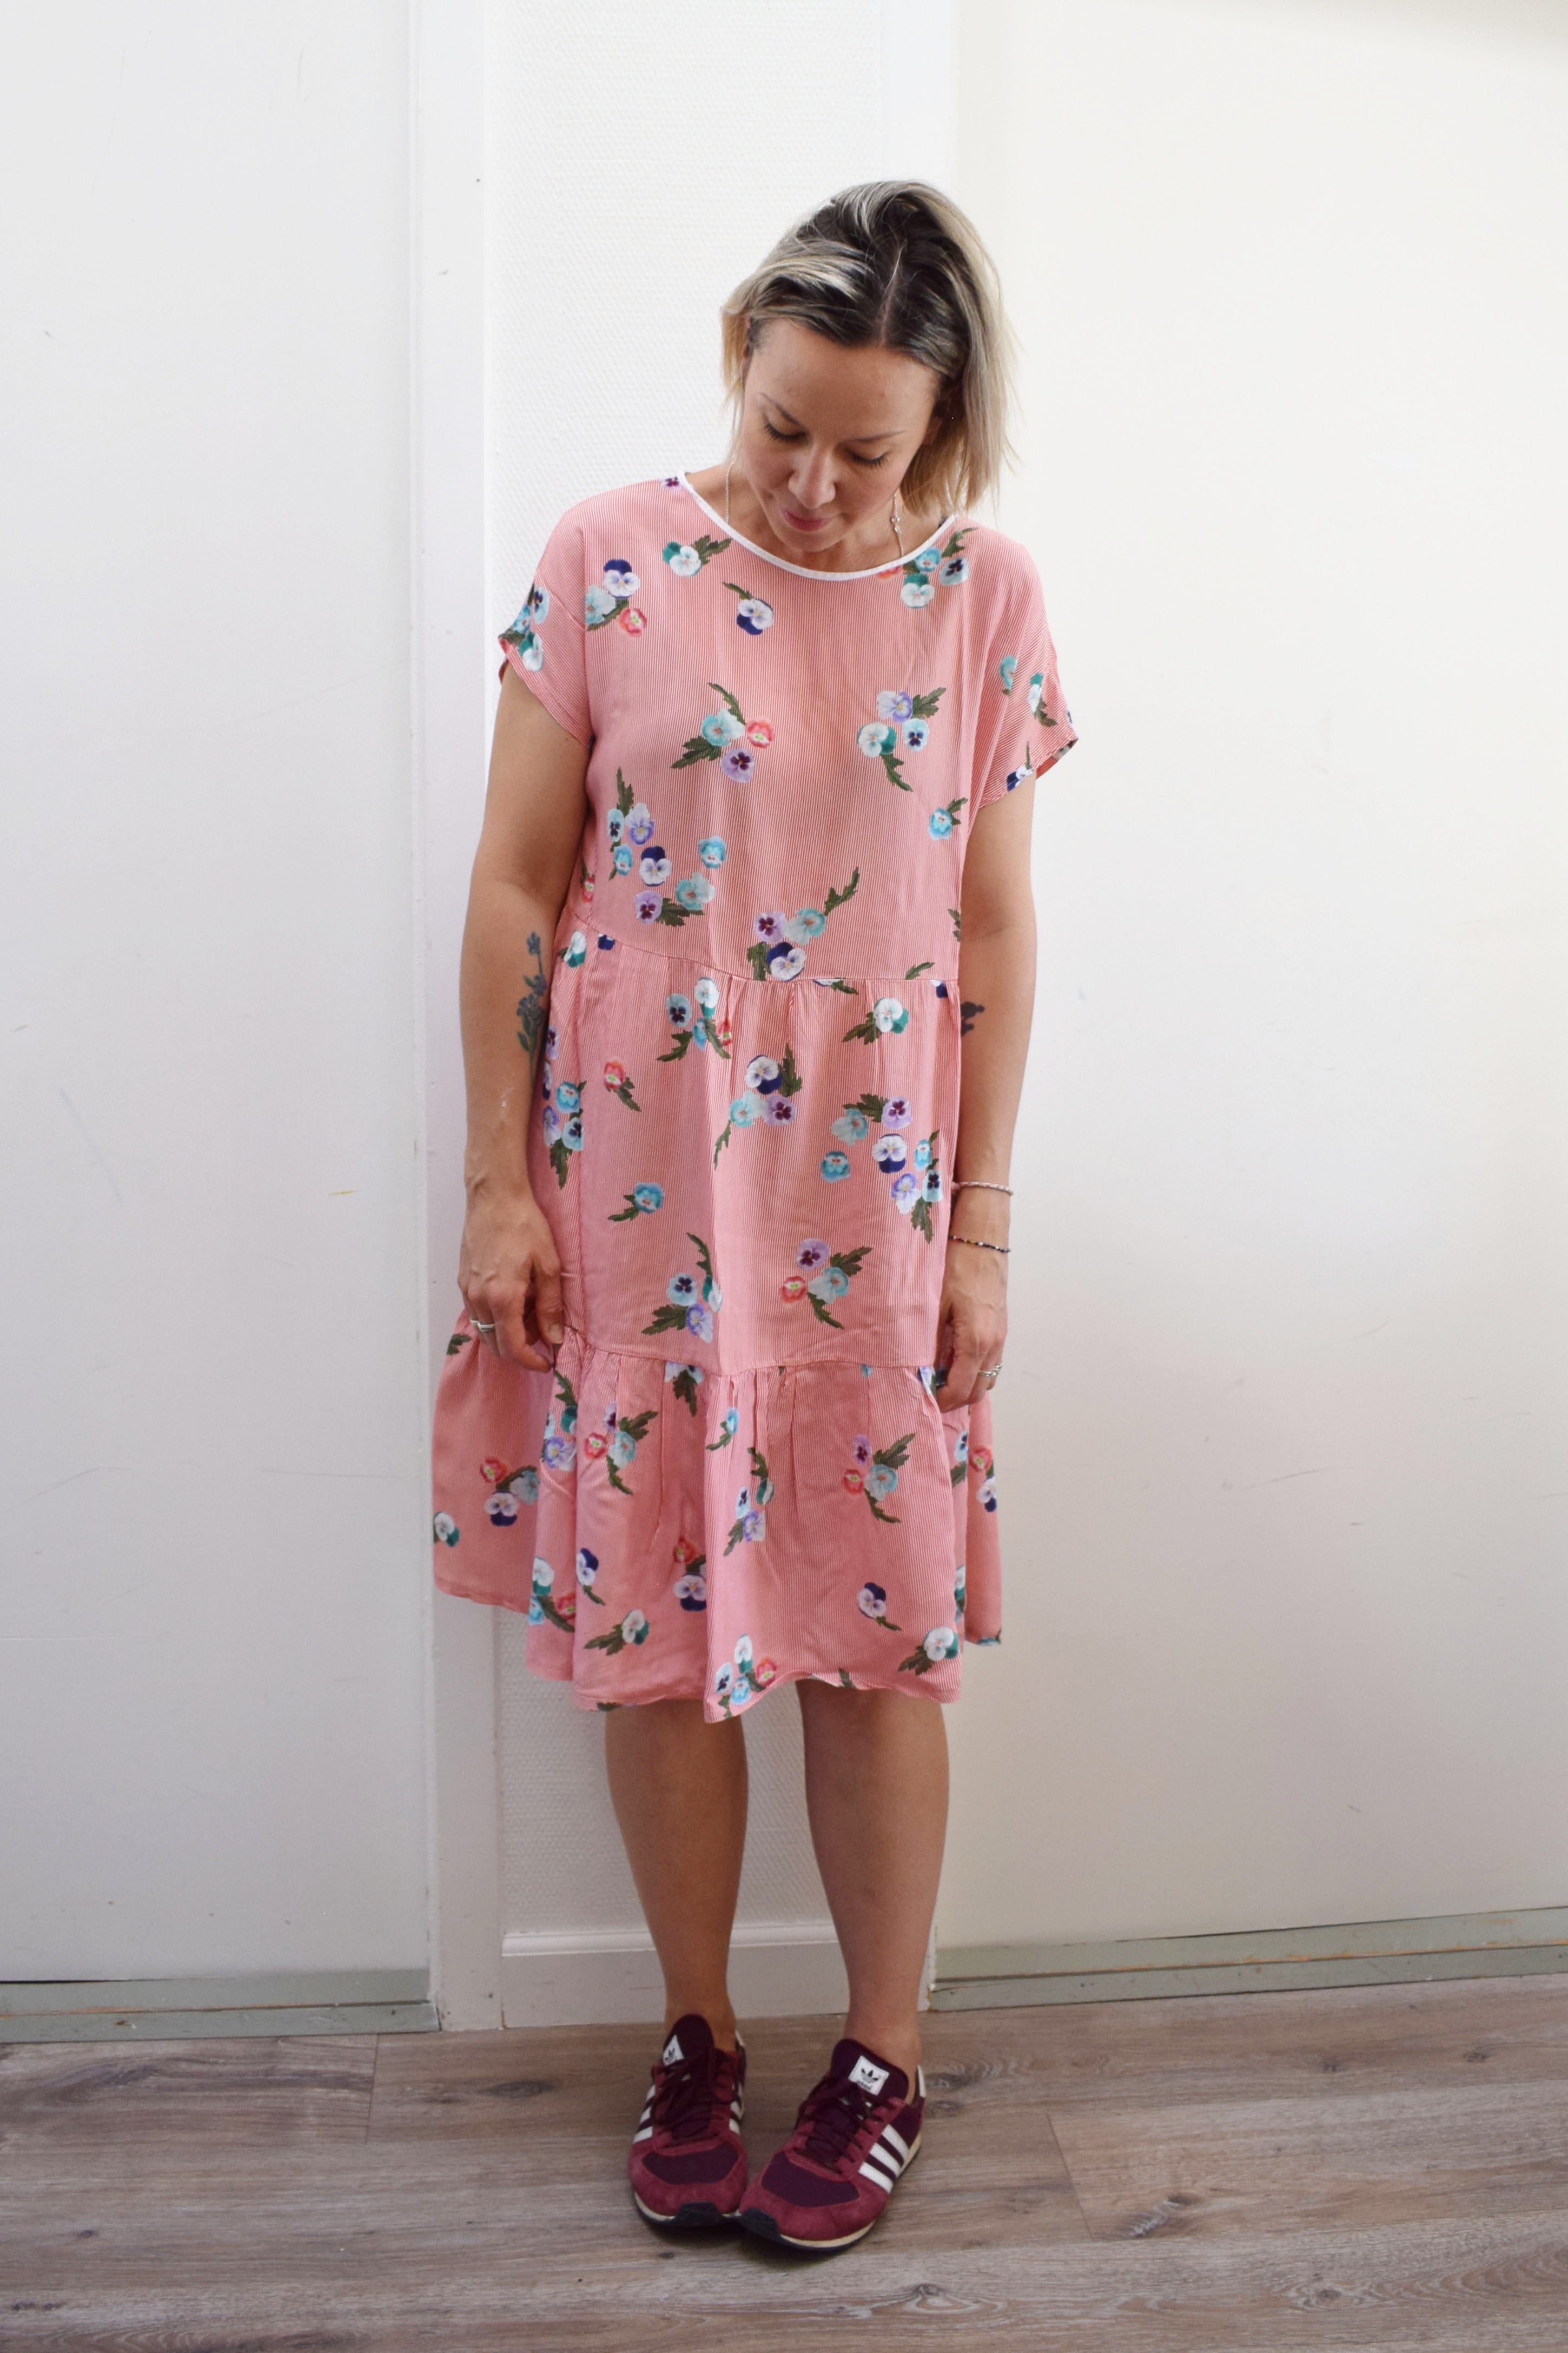 The favourite tiered dress DIY